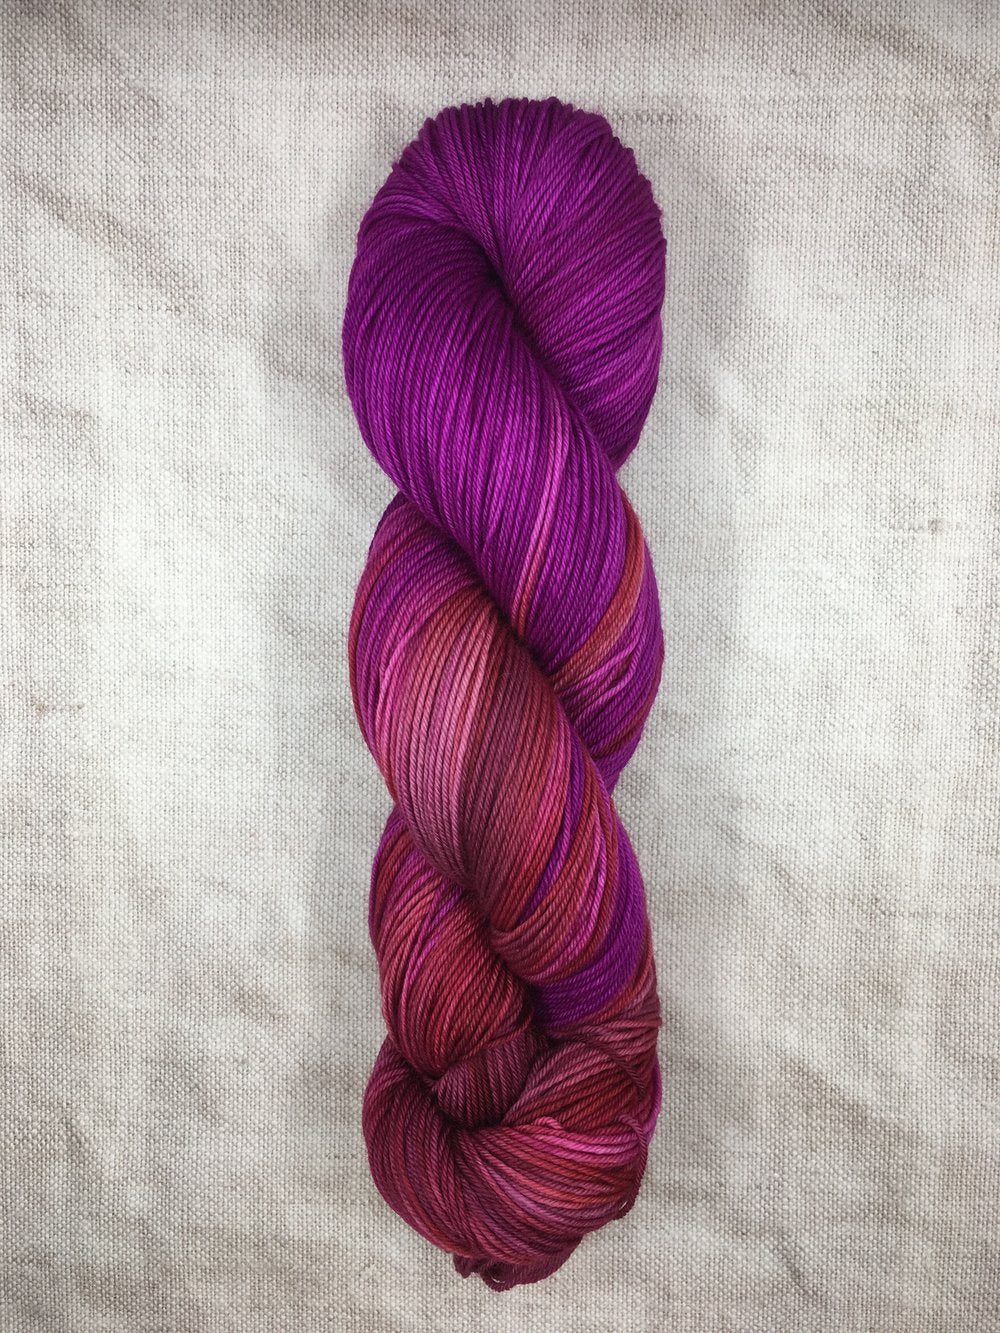 HAND DYED YARN Grainne wool indie dyed yarn | On The Night Of The Full Moon | Available in yarn weights Lace, 4ply/fingering/sock, Sport, DK & Aran | Superwash | International shipping from our online yarn store based in Donegal, Ireland | Suitable for knitting, crochet & weaving | Natural fibers |